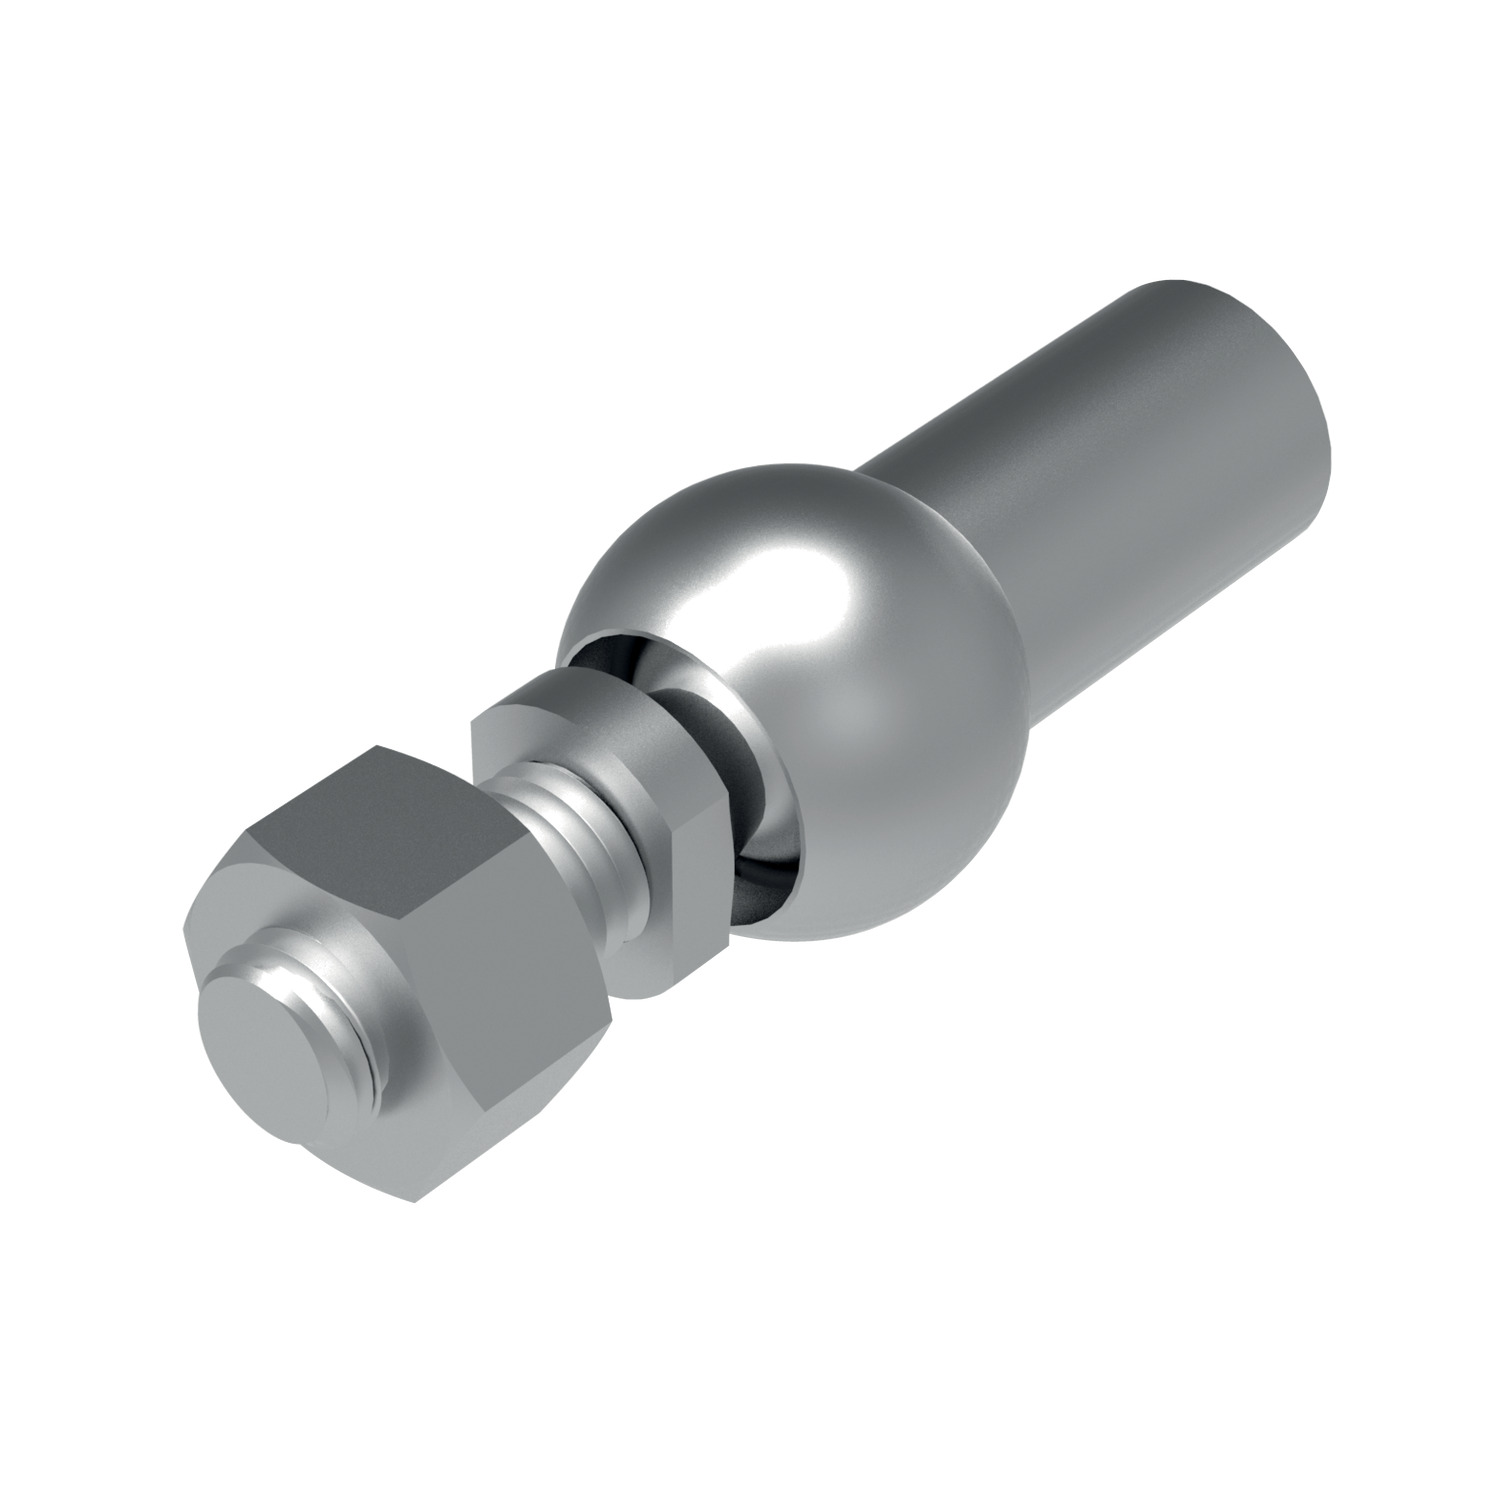 Product 65522, Axial Ball and Socket Joints left hand thread / 